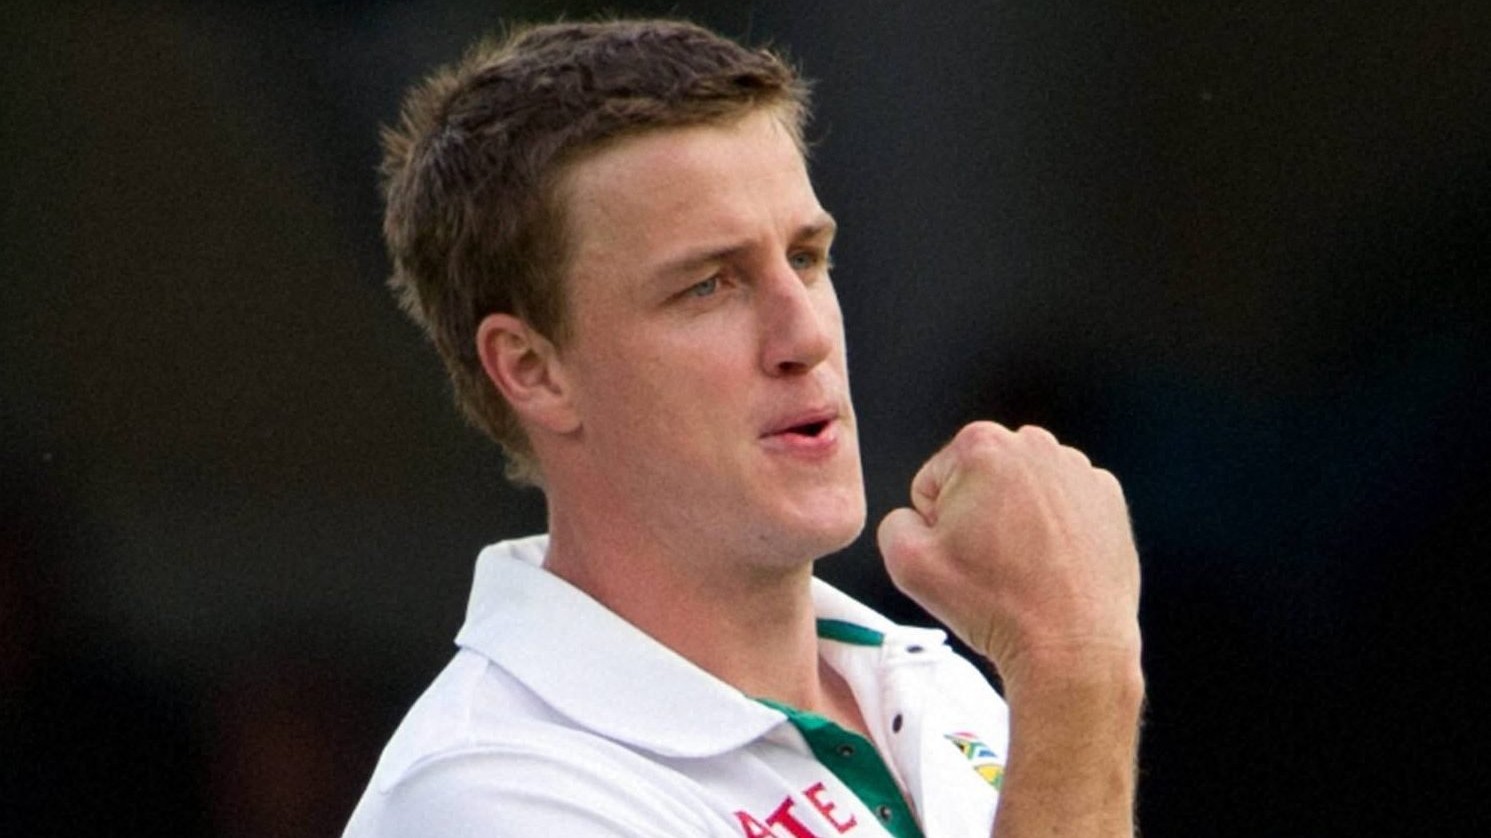 “Don’t overthink saliva ban,” Morne Morkel is confident of bowlers finding alternatives to swing the ball